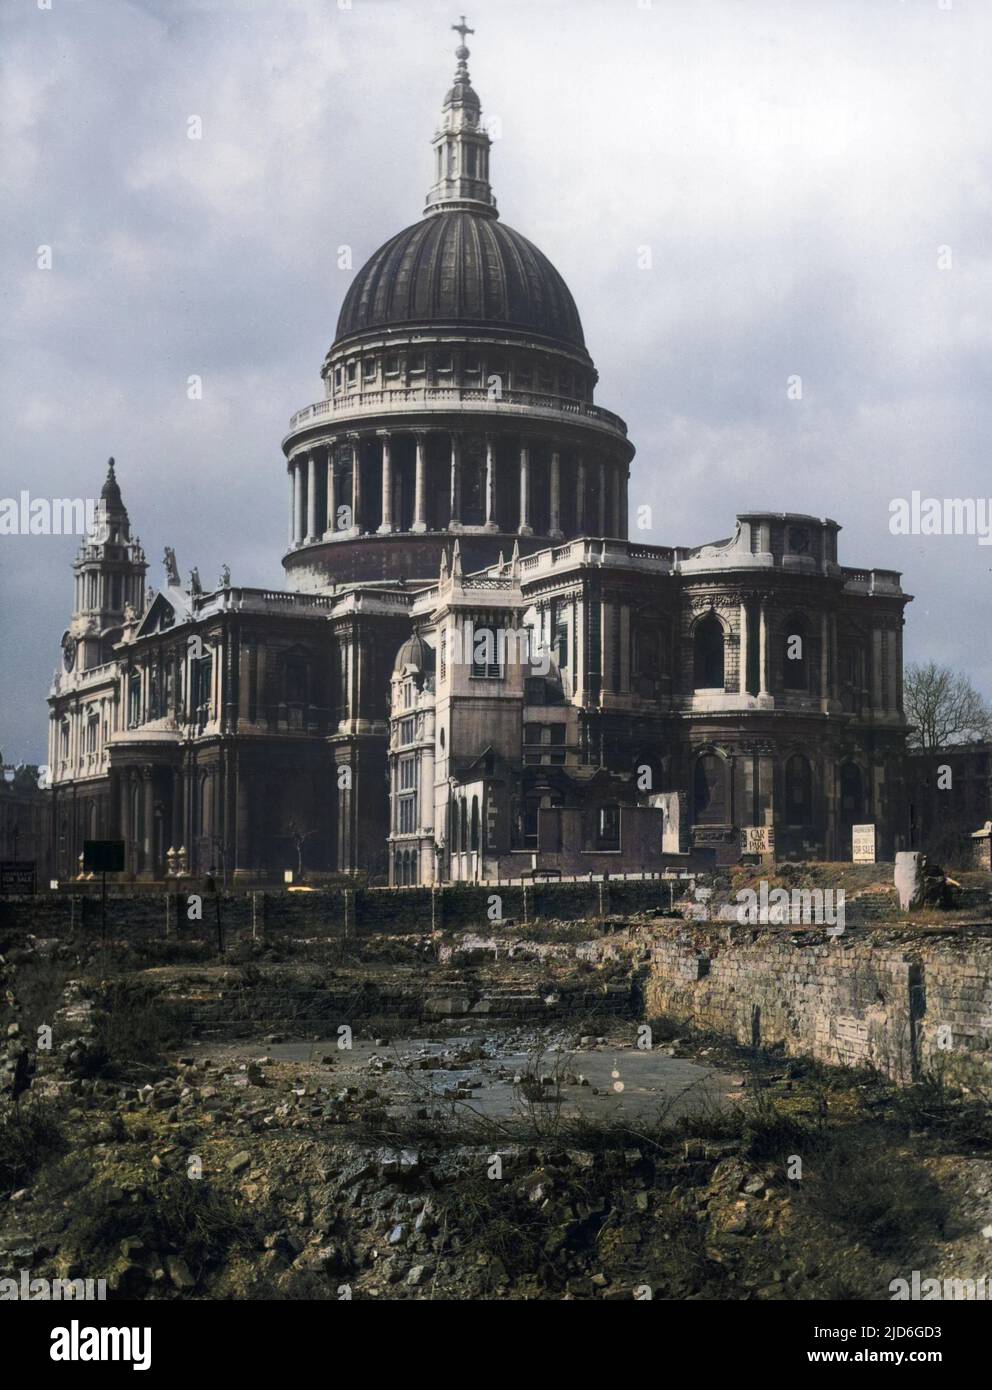 St James's war damage : London Remembers, Aiming to capture all